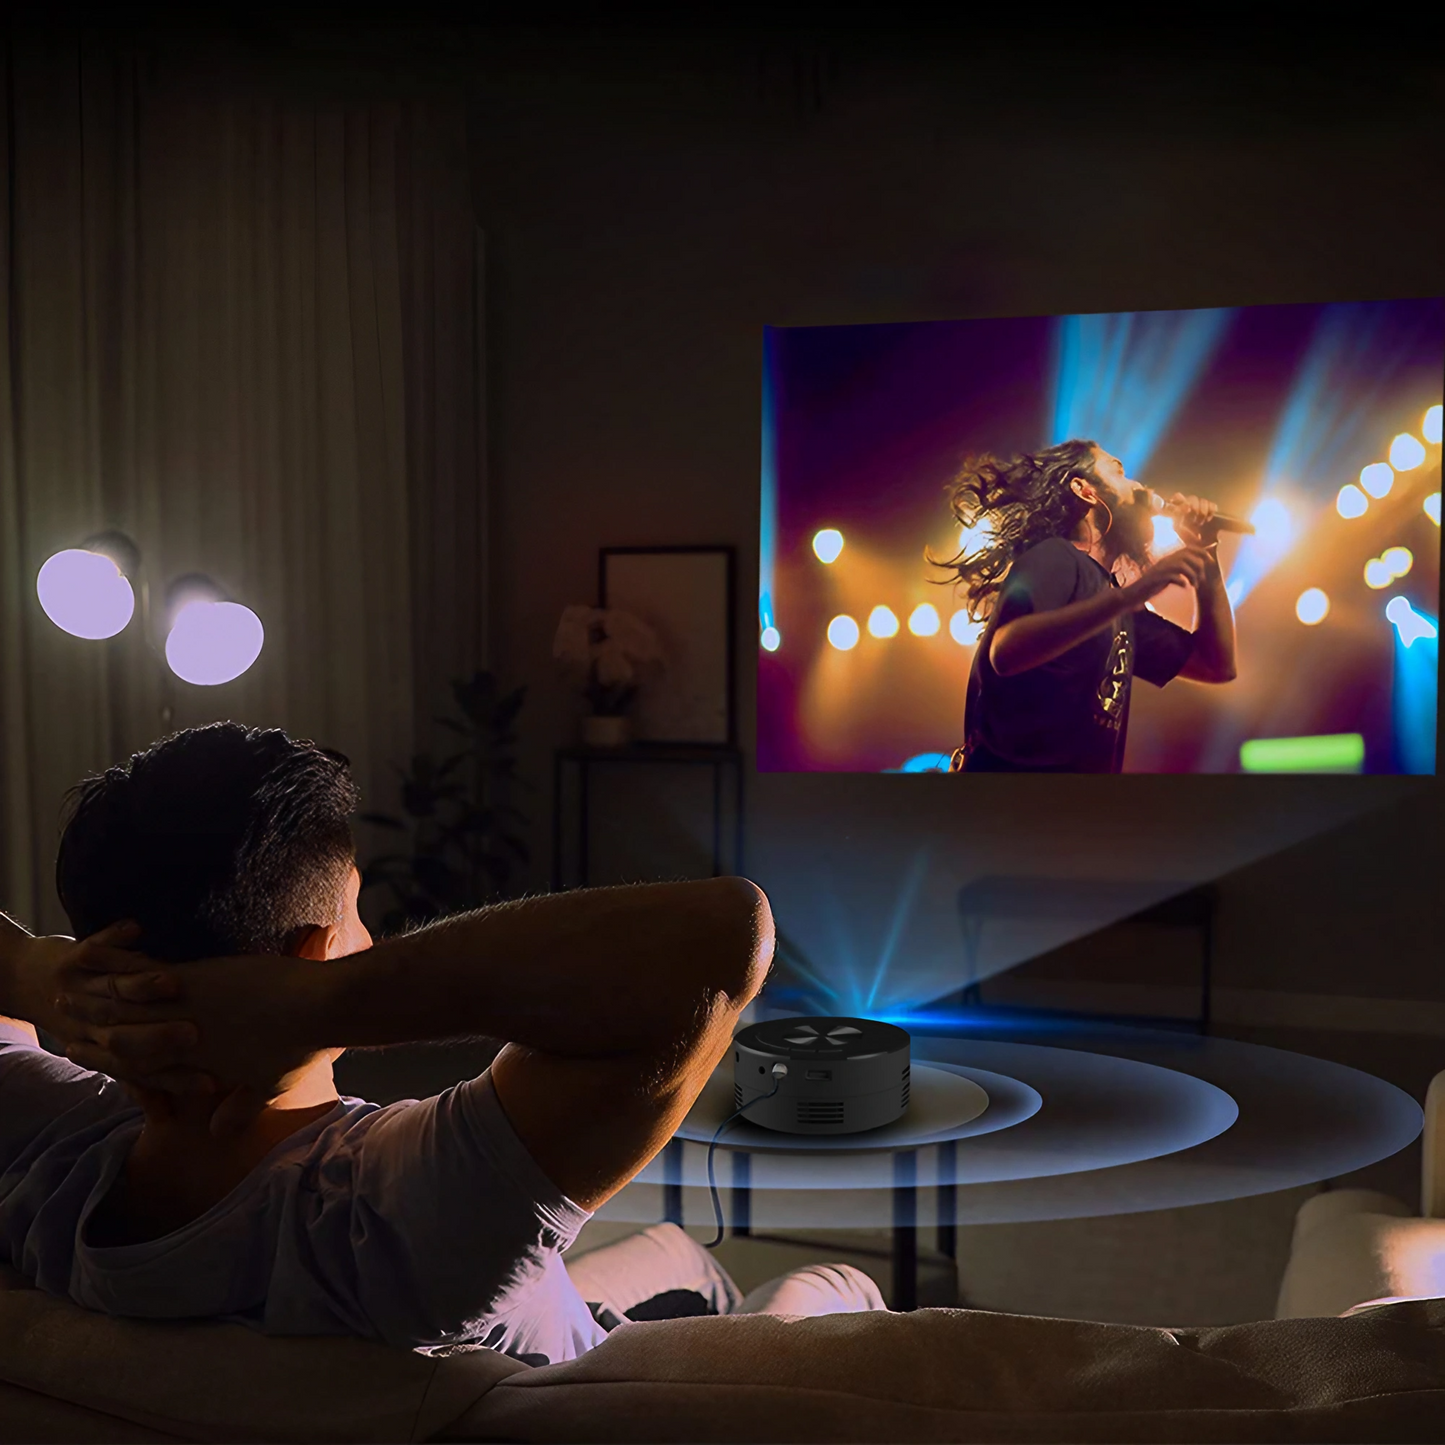 Capture the essence of the PocketPro™, with its high-quality projection and impressive 30,000-hour LED life, perfect for endless entertainment.